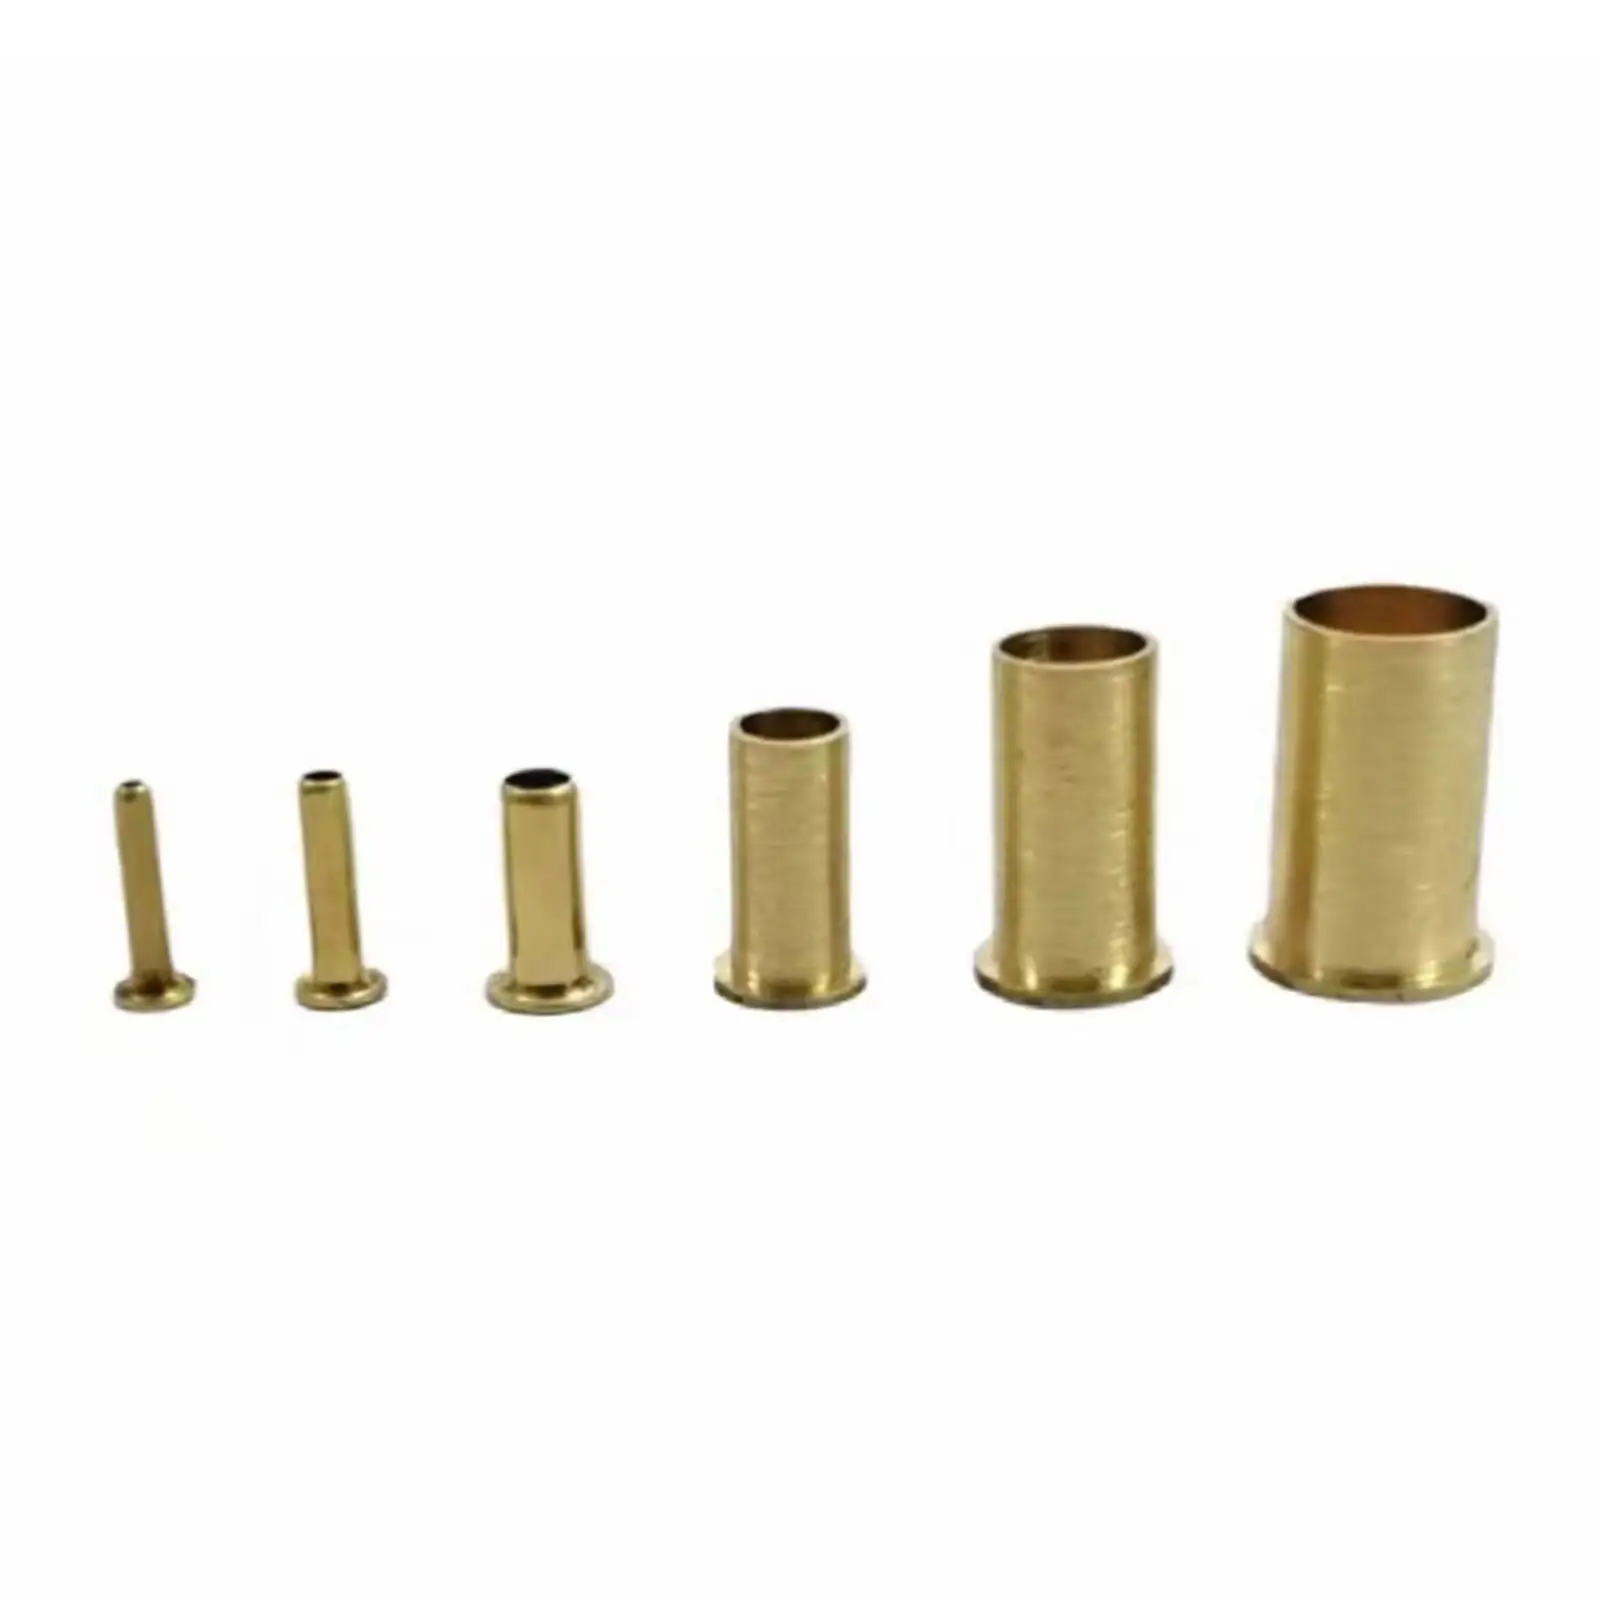 METRIC 10MM ID COMPRESSION QTY 2 BRASS TUBE COUPLINGS 